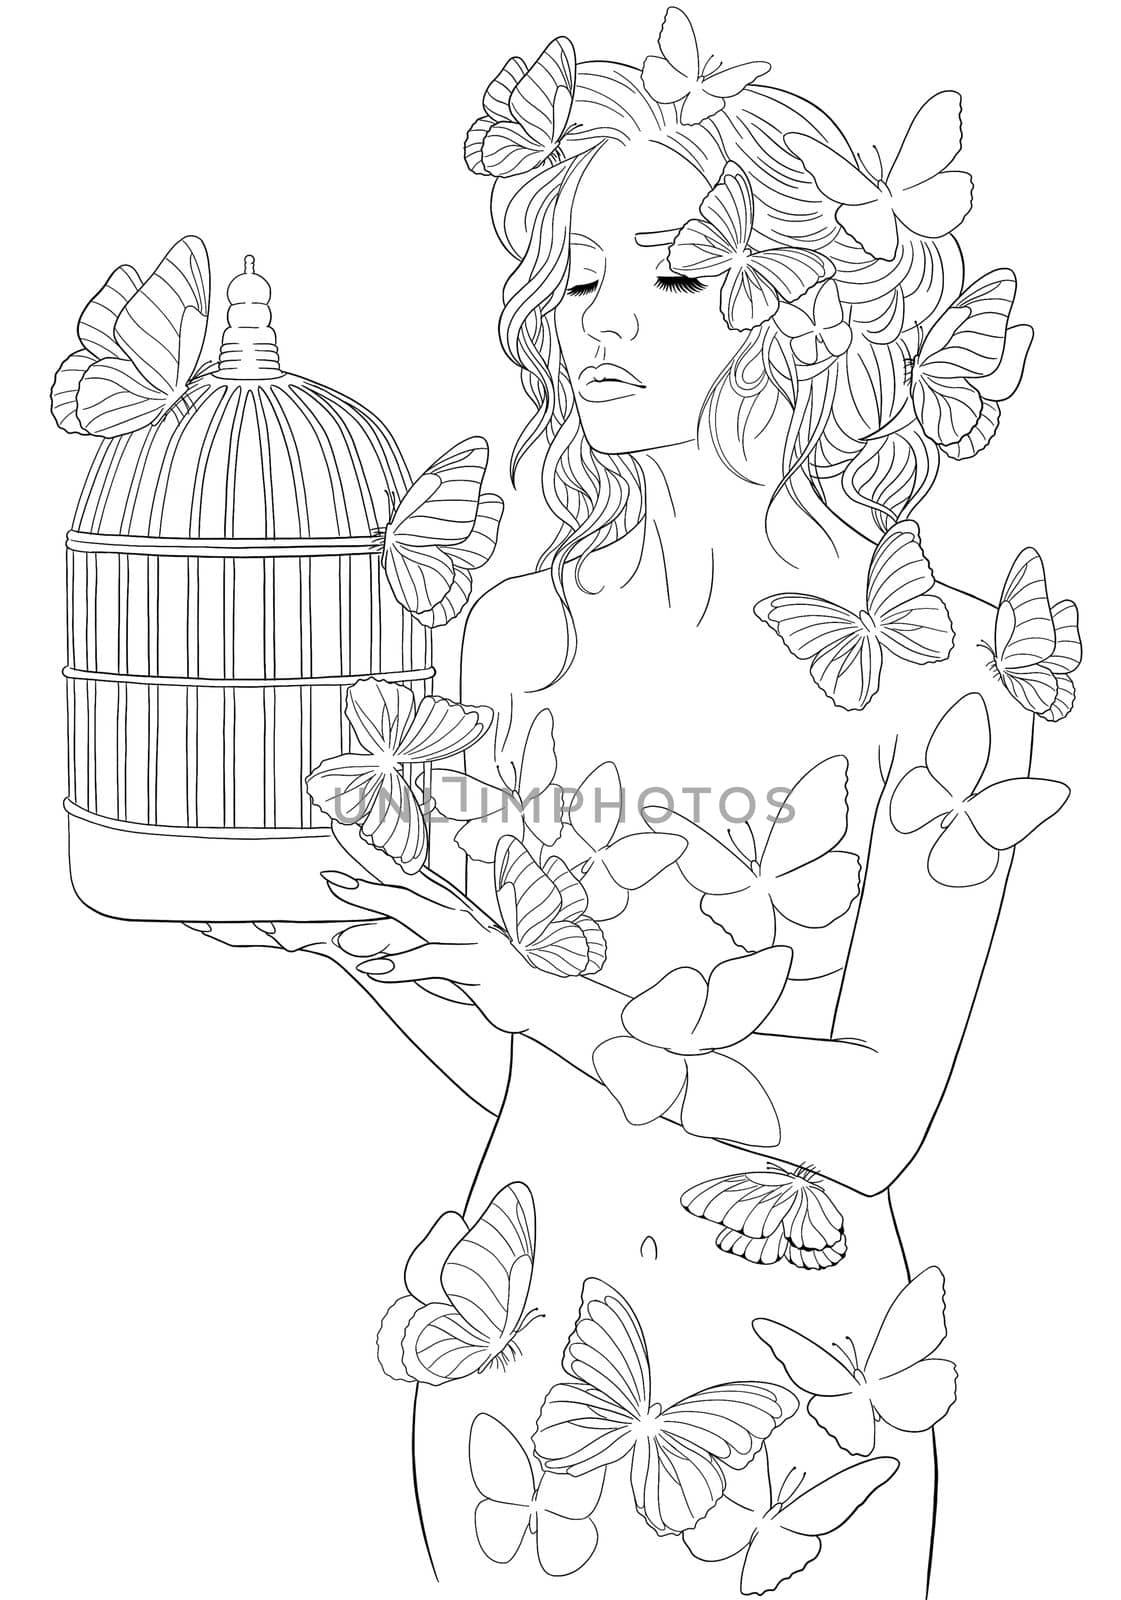 coloring page girl with butterflies for kids by kr0k0